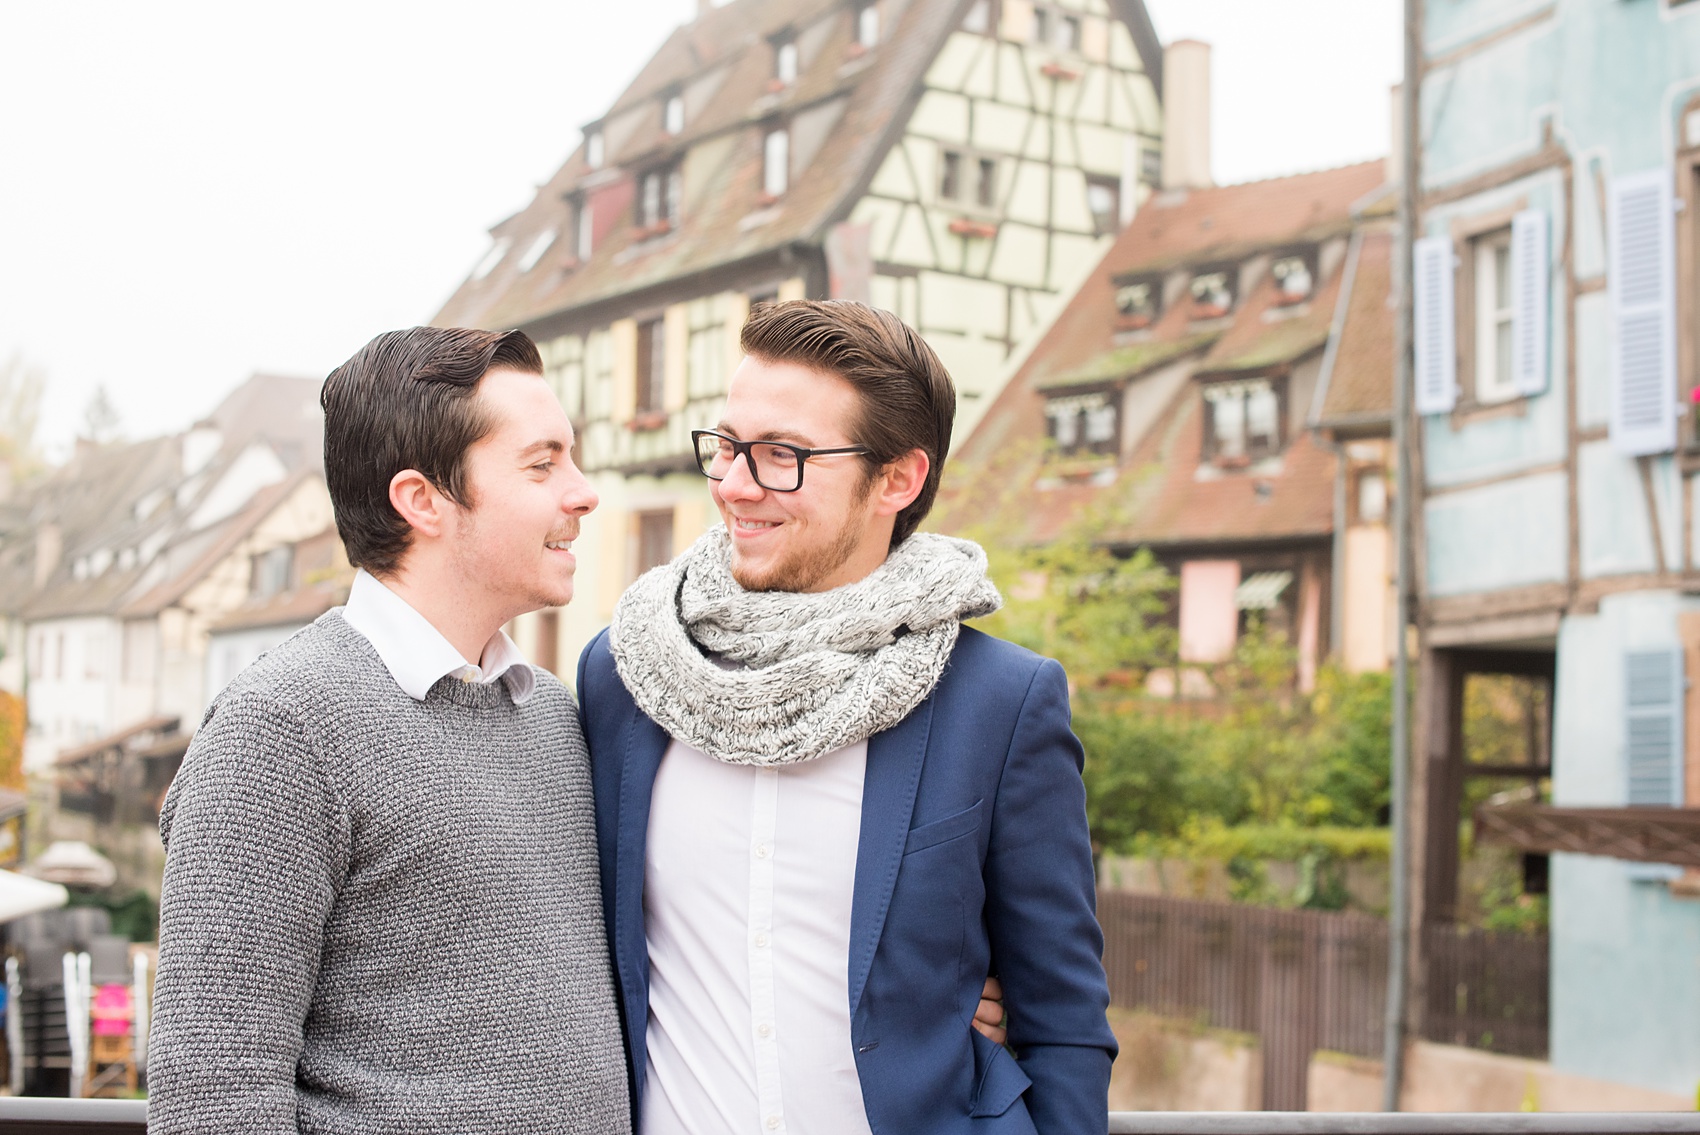 Mikkel Paige Photography pictures of an engagement session in Colmar, France in the Alsace region. Photo of a same sex couple in Little Venice.